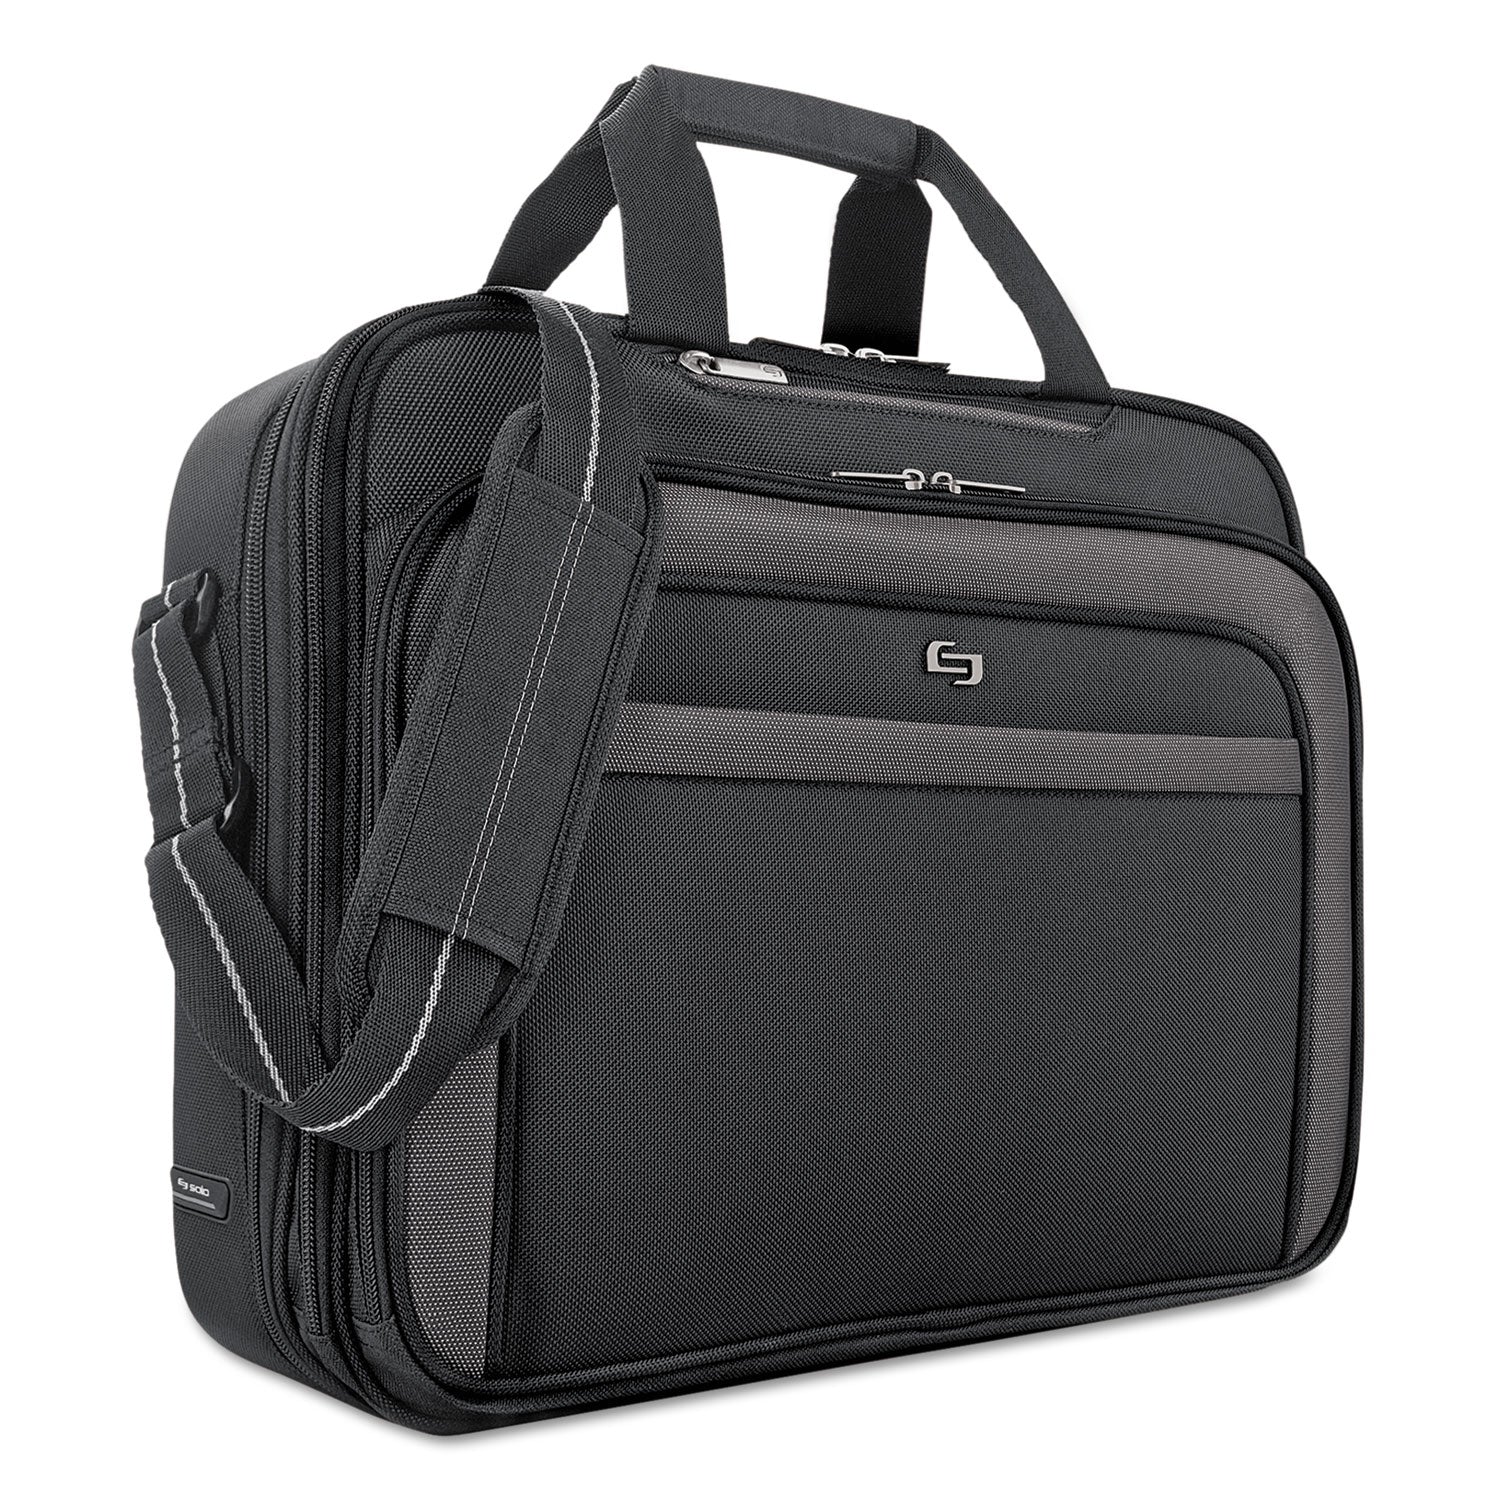 Pro CheckFast Briefcase, Fits Devices Up to 17.3", Polyester, 17 x 5.5 x 13.75, Black - 